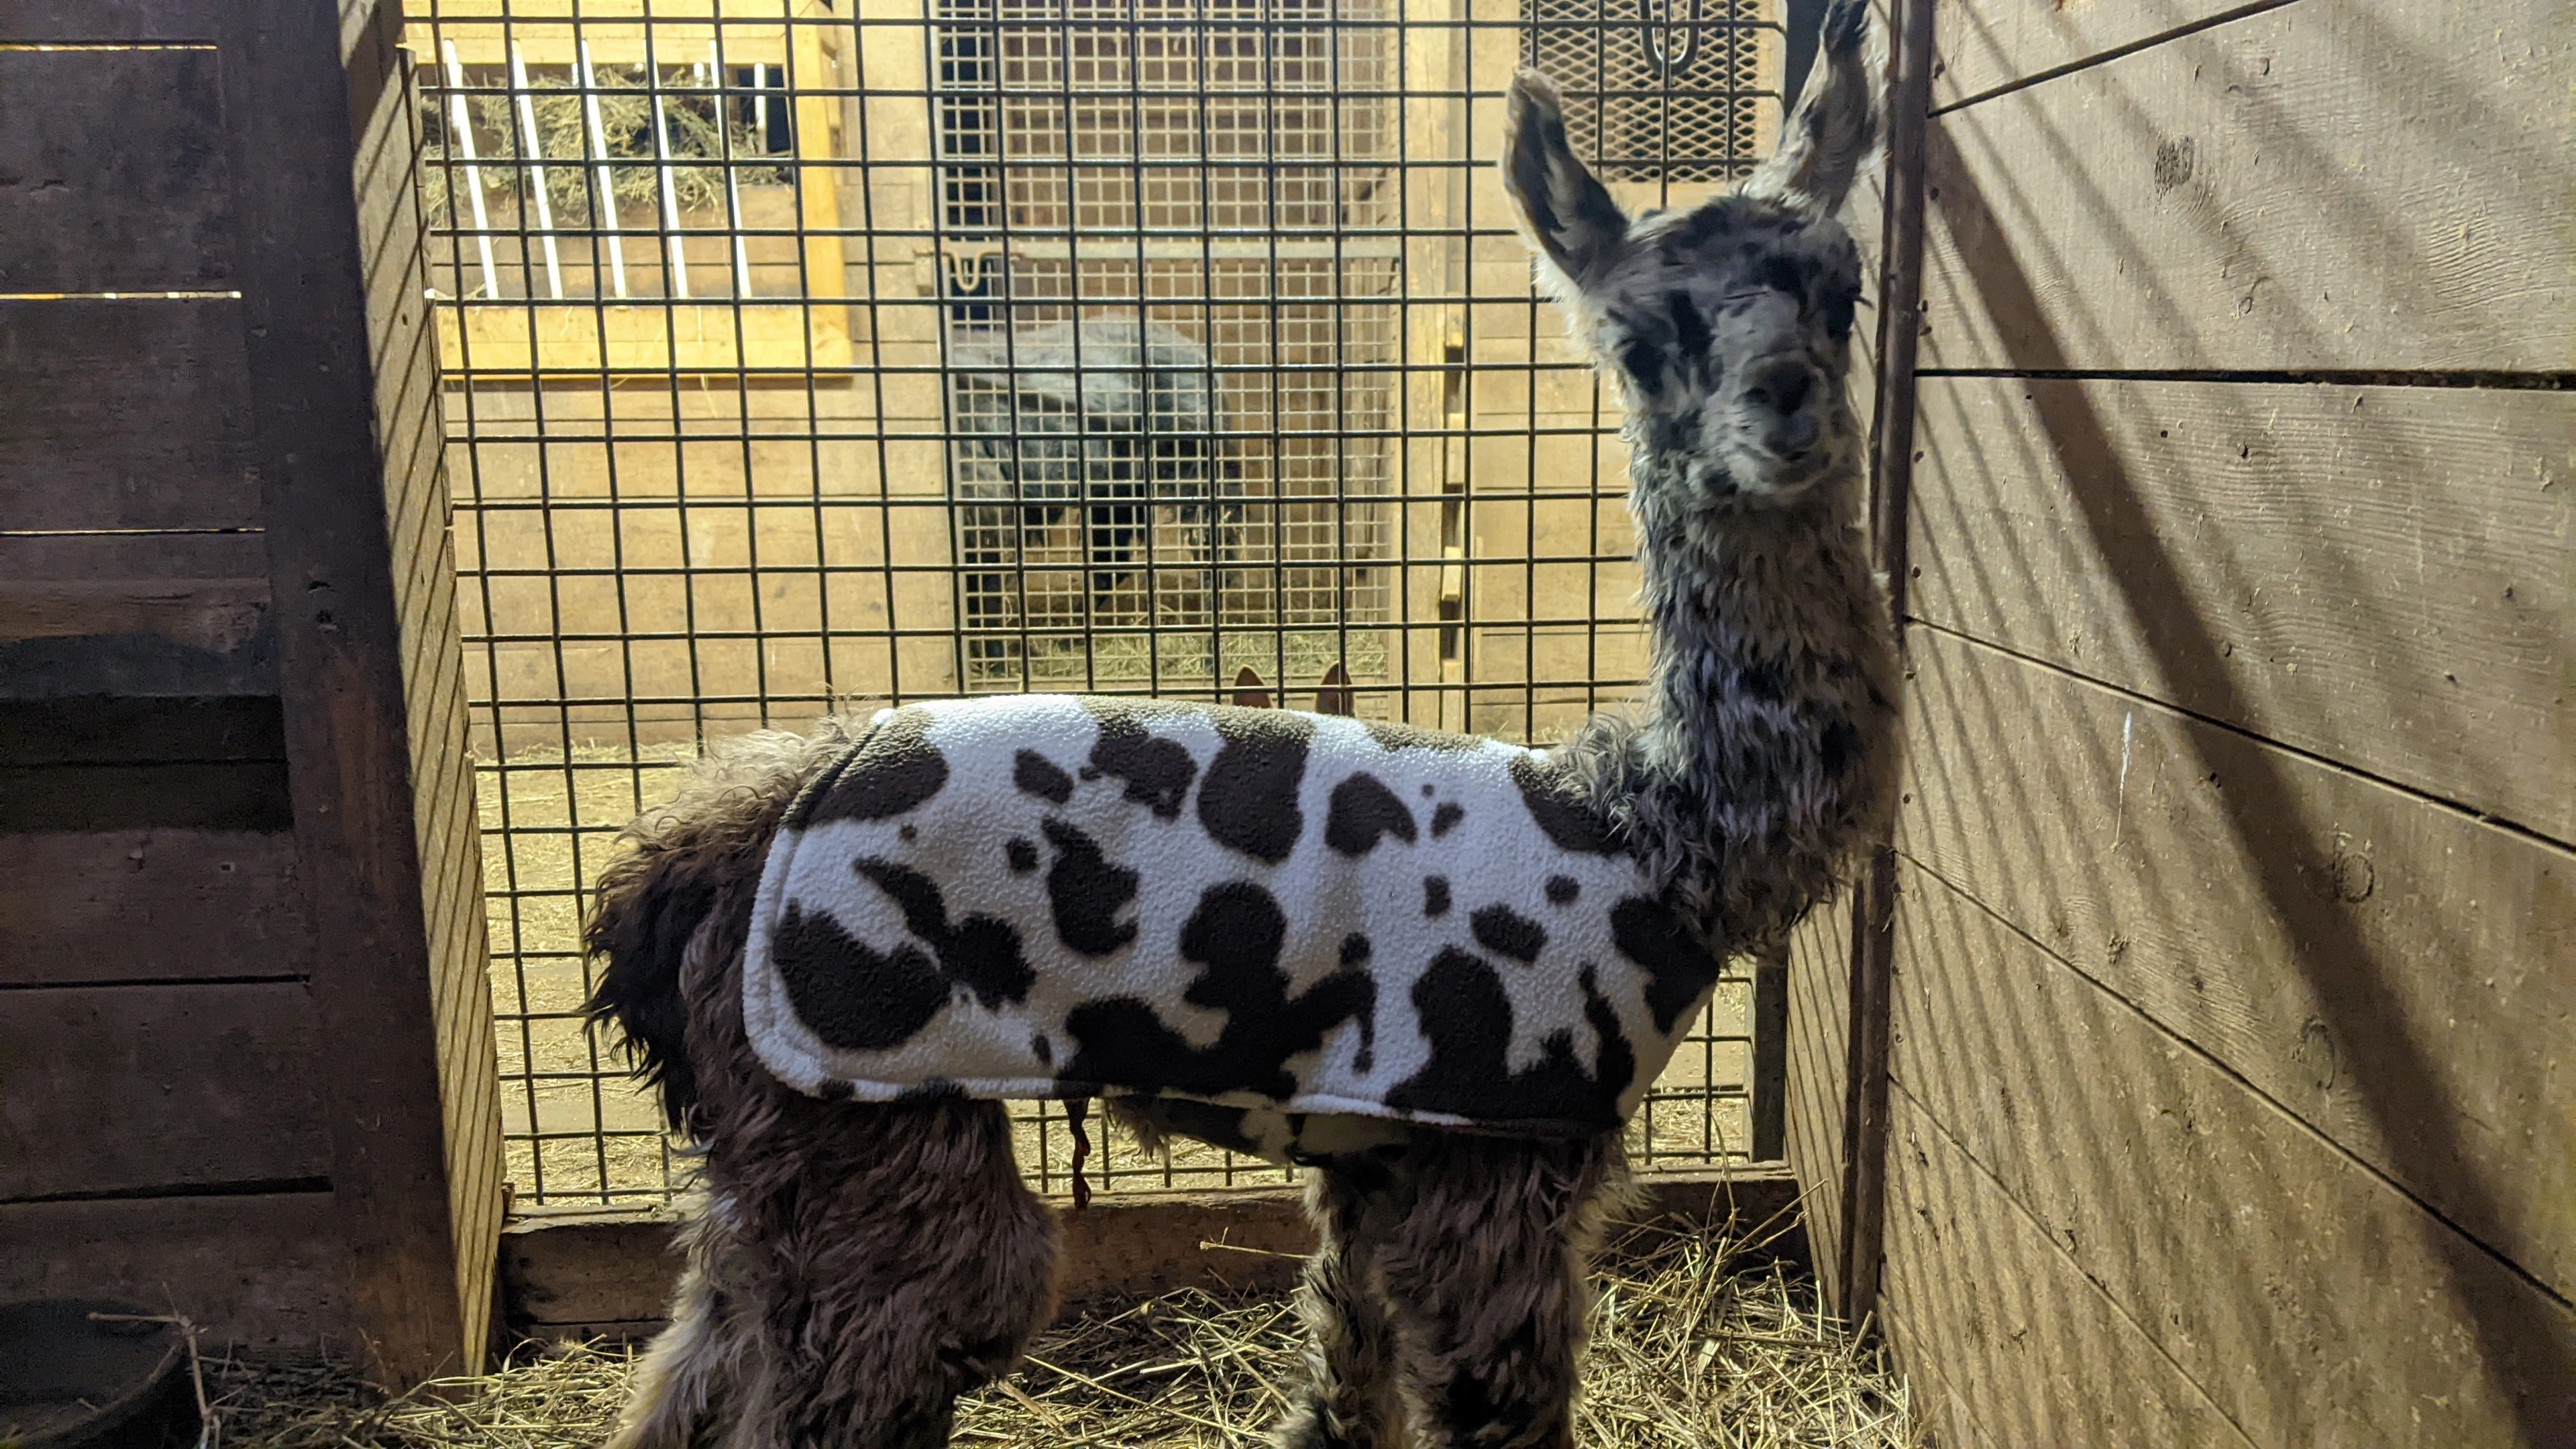 An image of a newborn llama named Fitz wearing a white and brown jacket